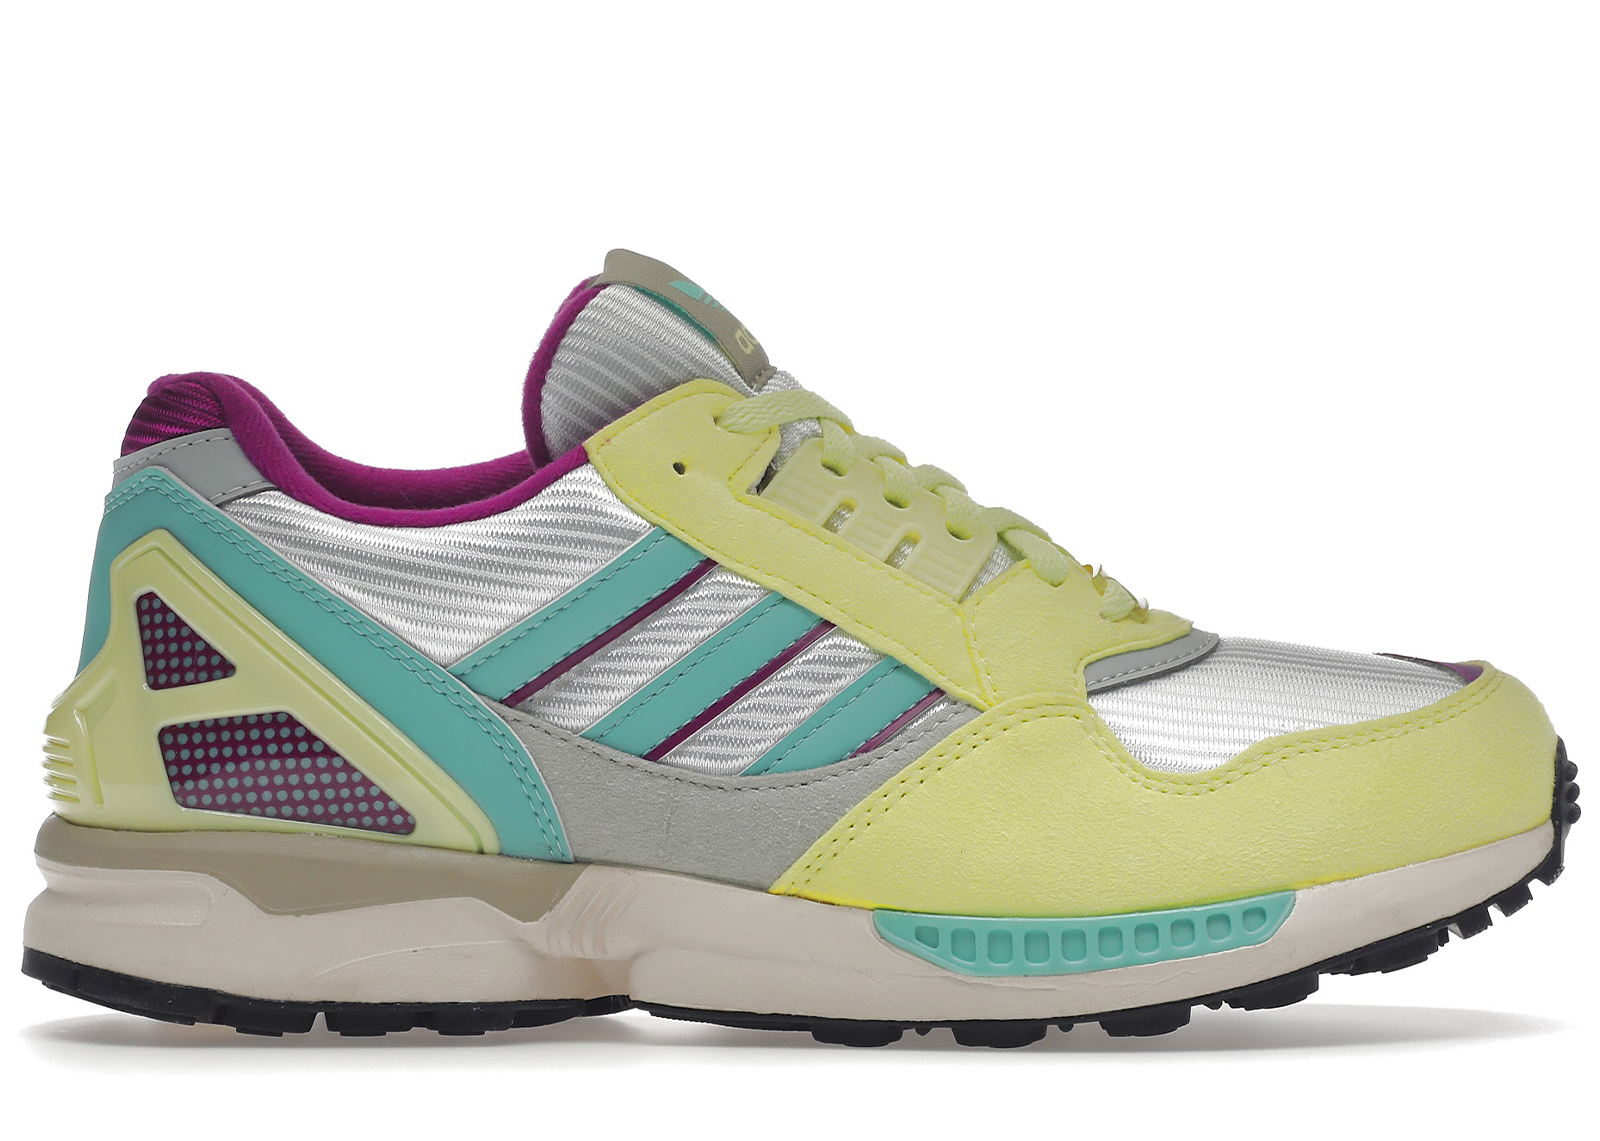 adidas ZX 9000 30 Years of Torsion Men's - FU8403 - US